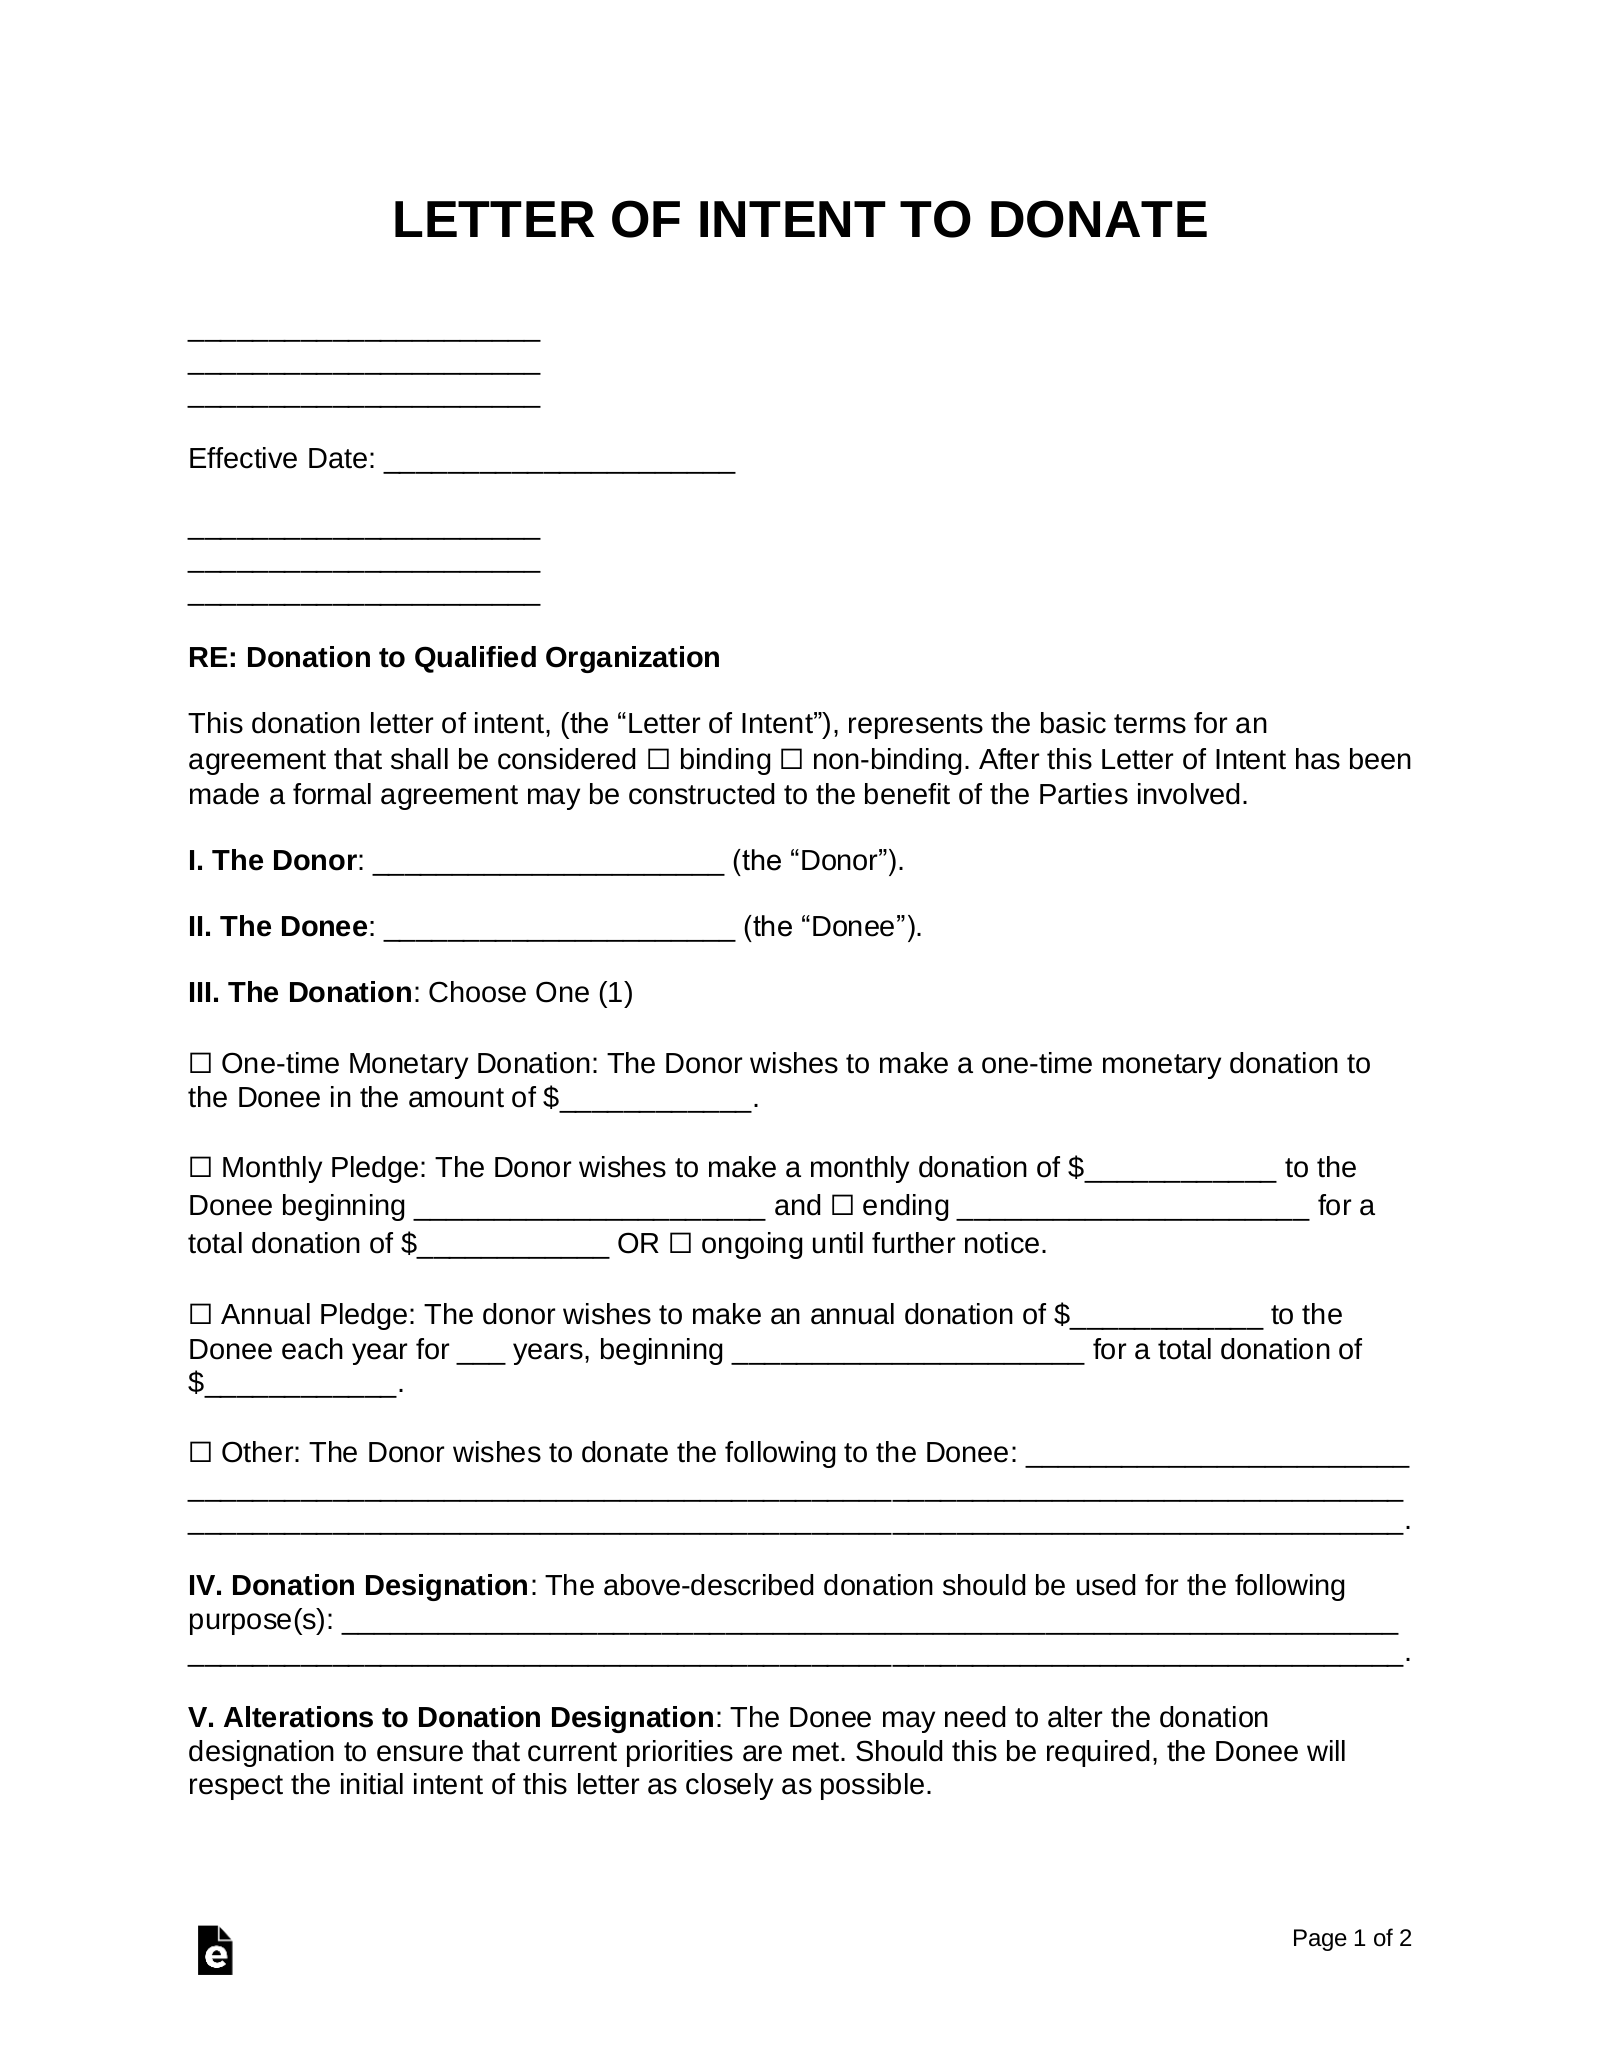 Donation Letter of Intent Template